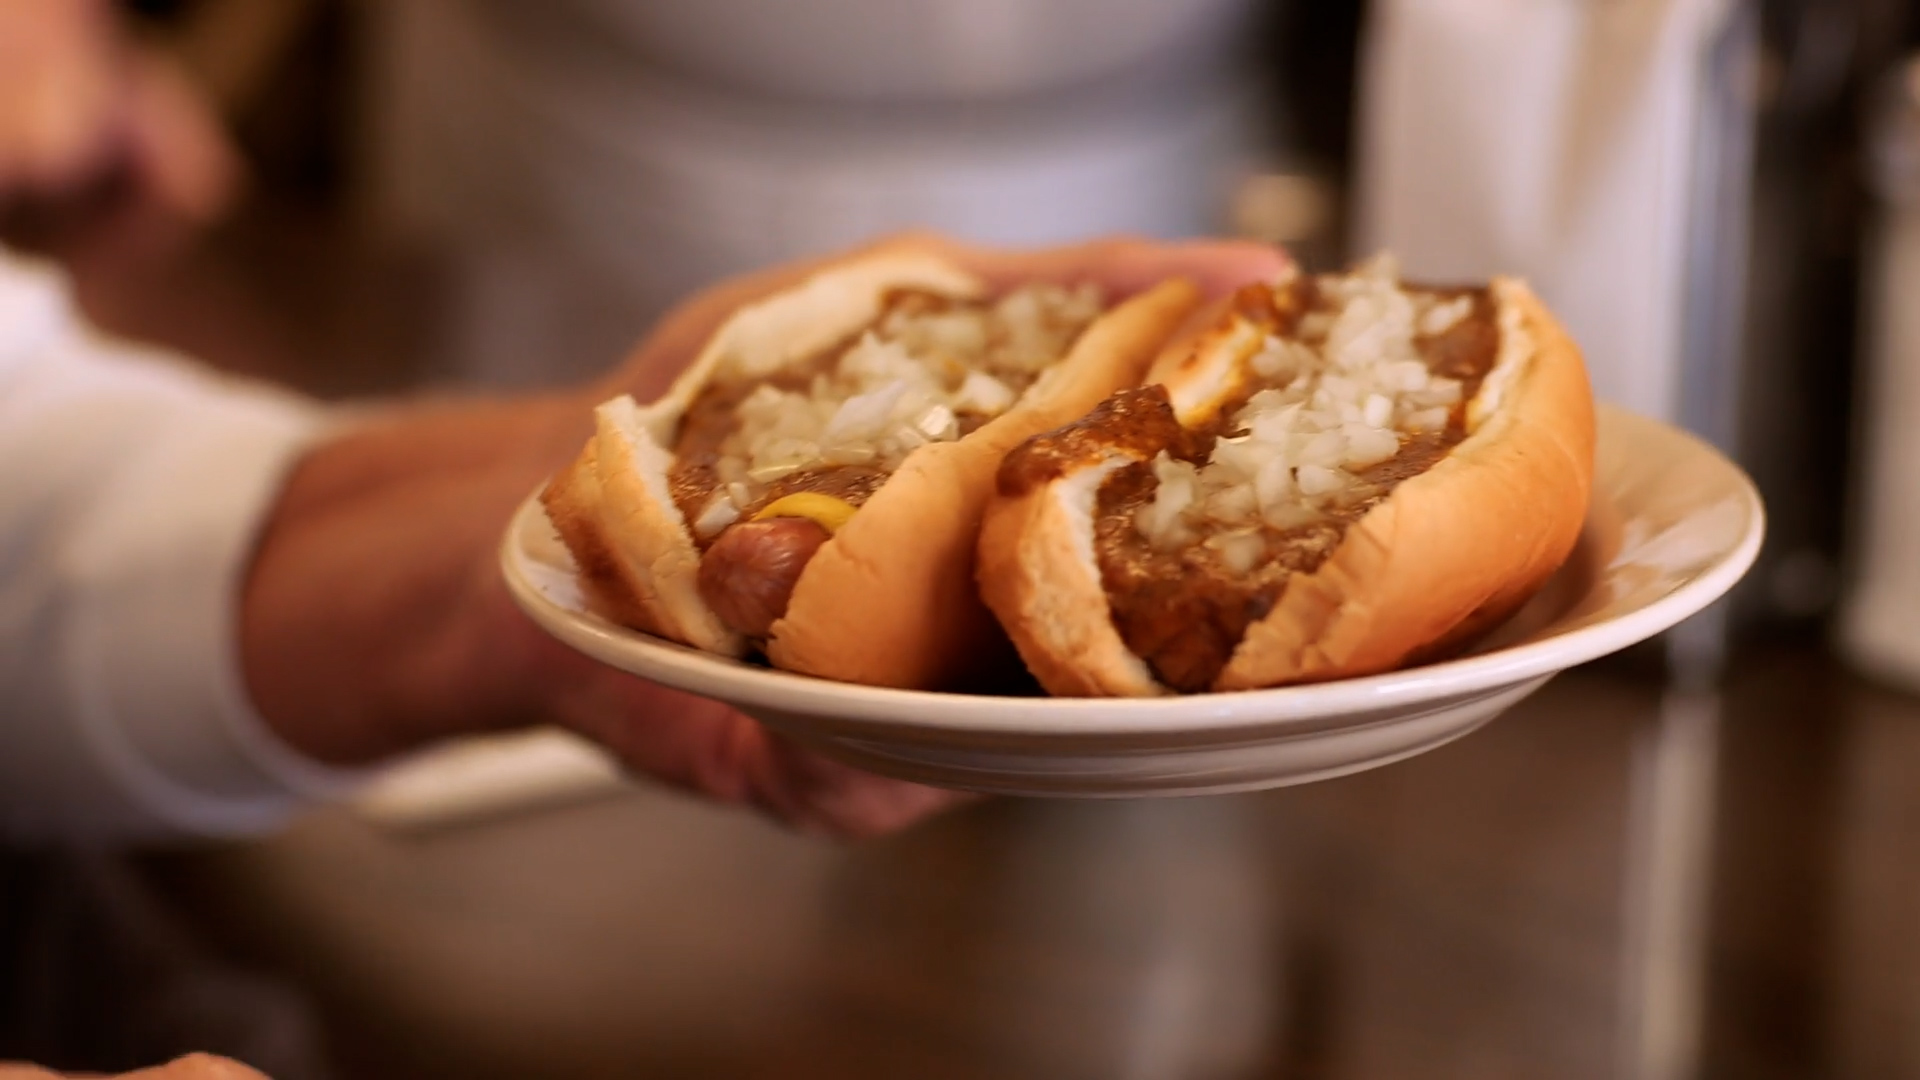 Dig Into These 6 Gourmet Hot Dogs - Hour Detroit Magazine